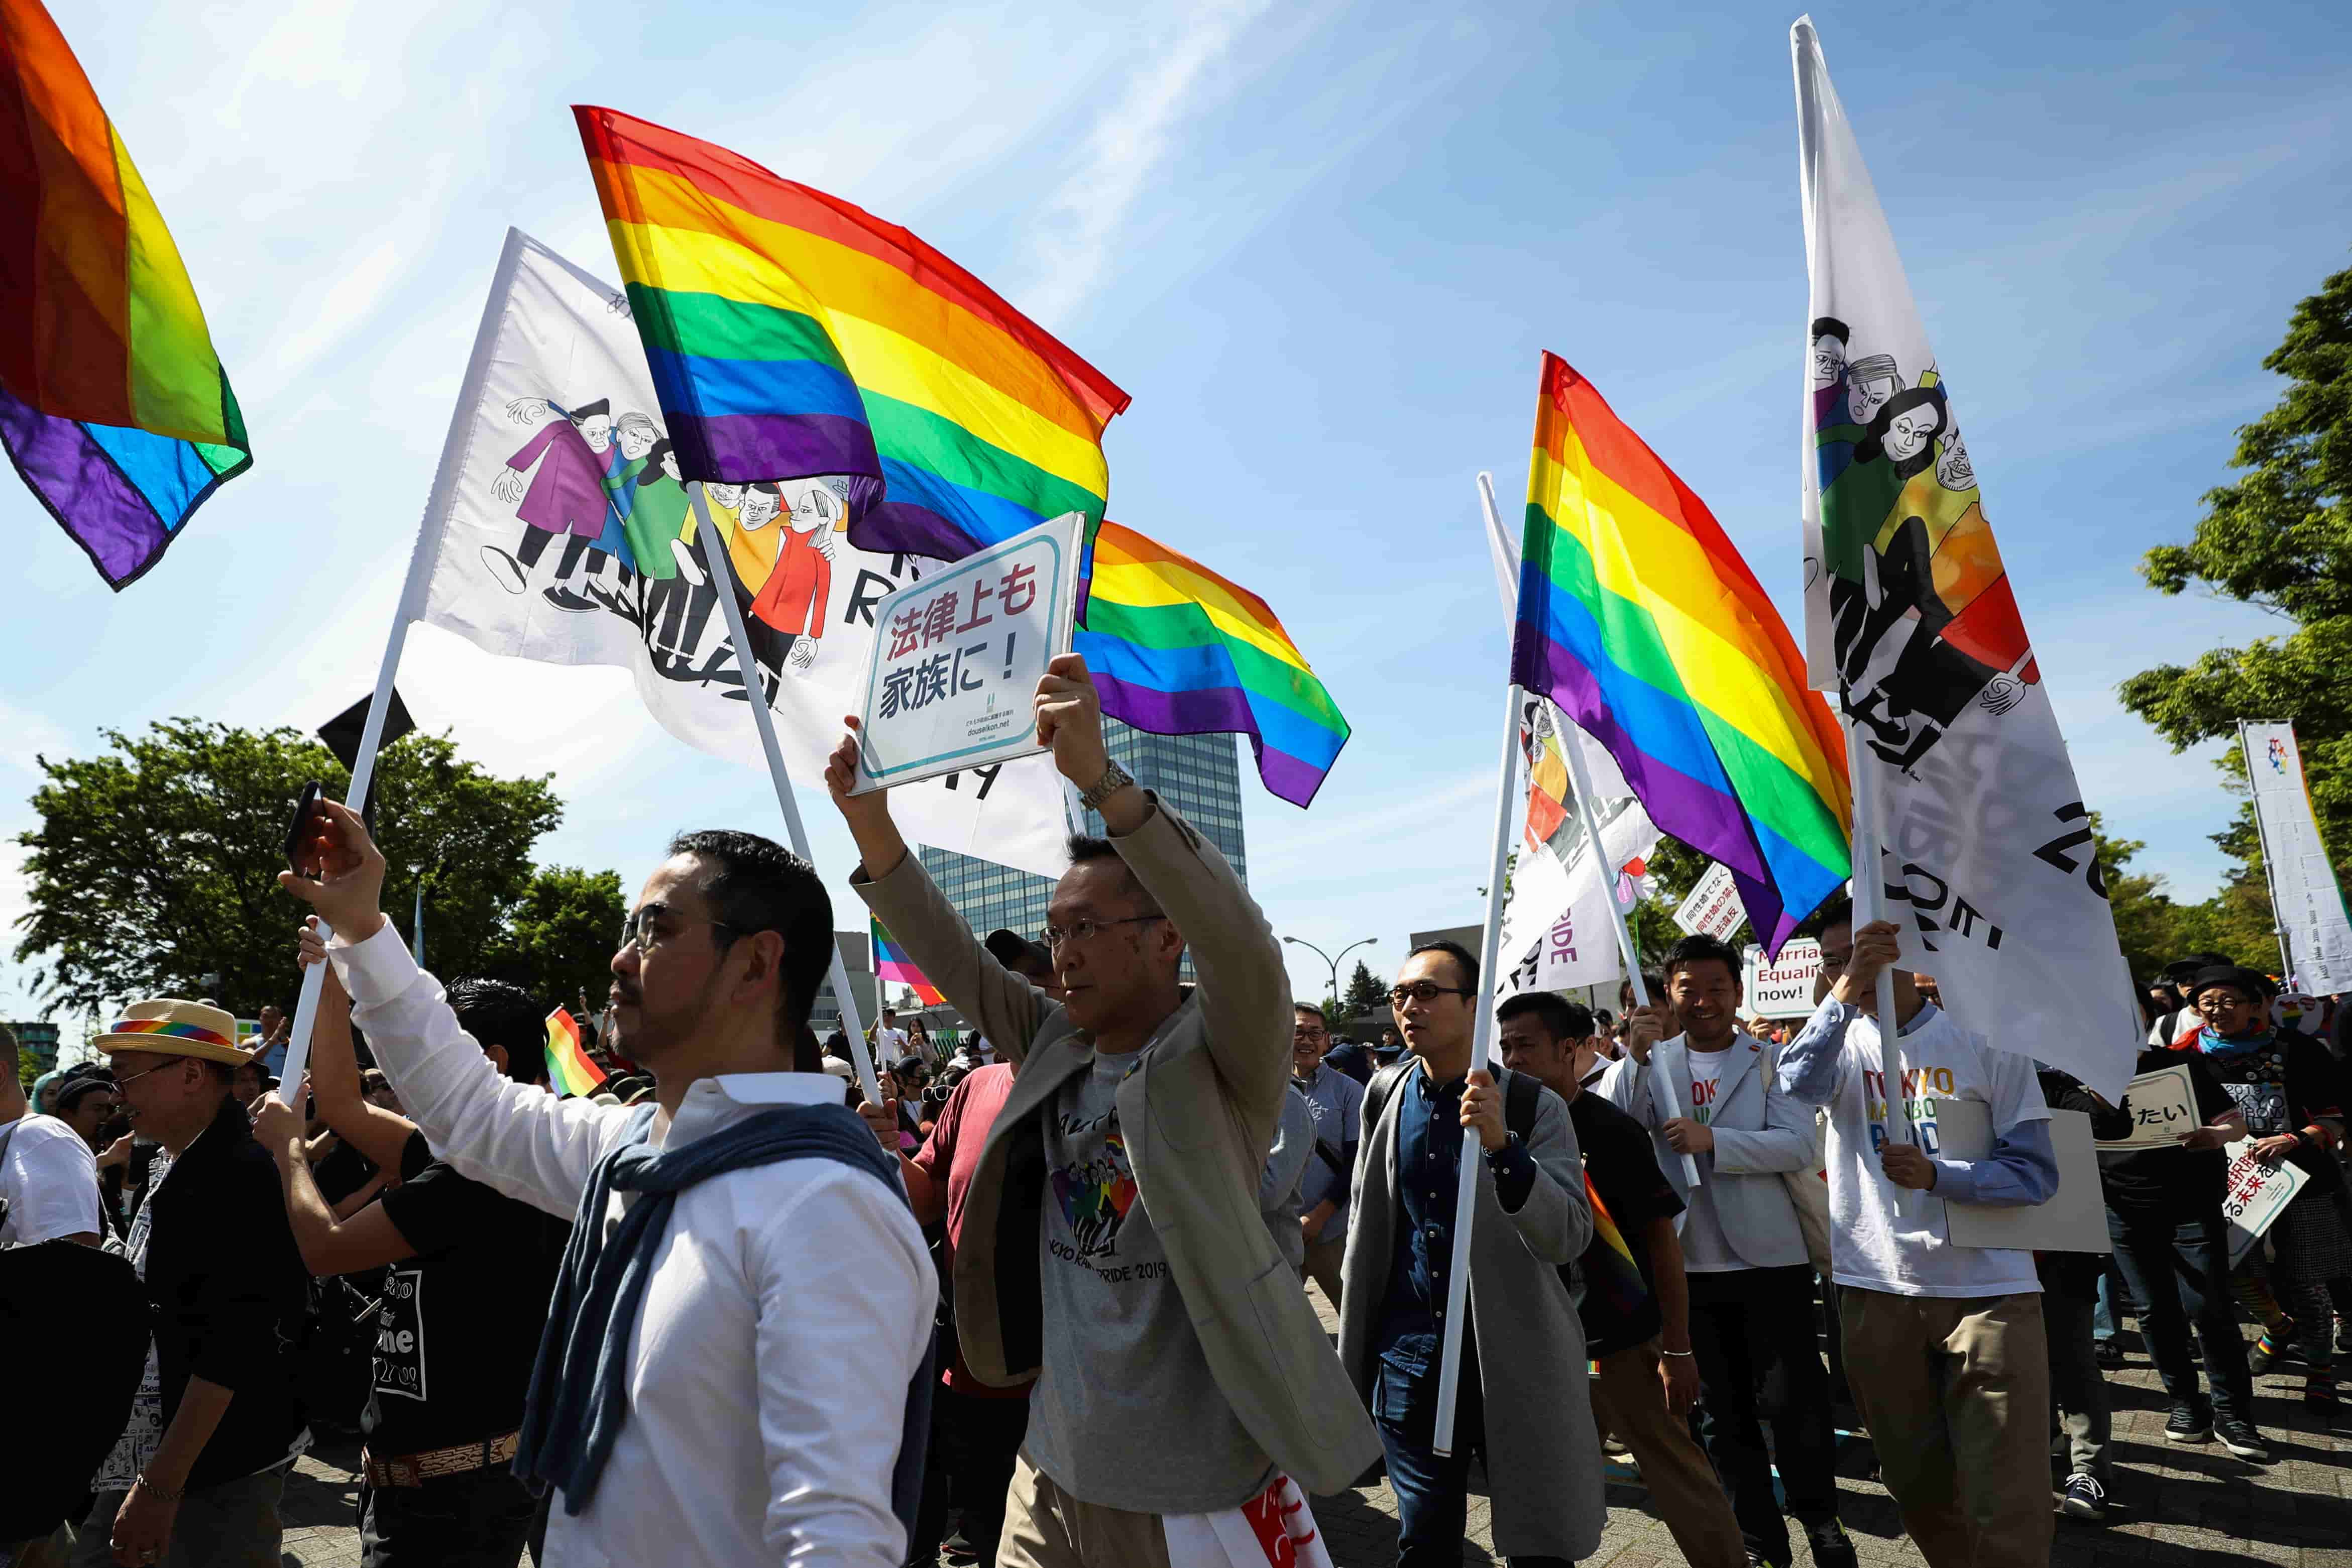 Japan Court Rules Ban on Same-Sex Marriage is 'Unconstitutional'